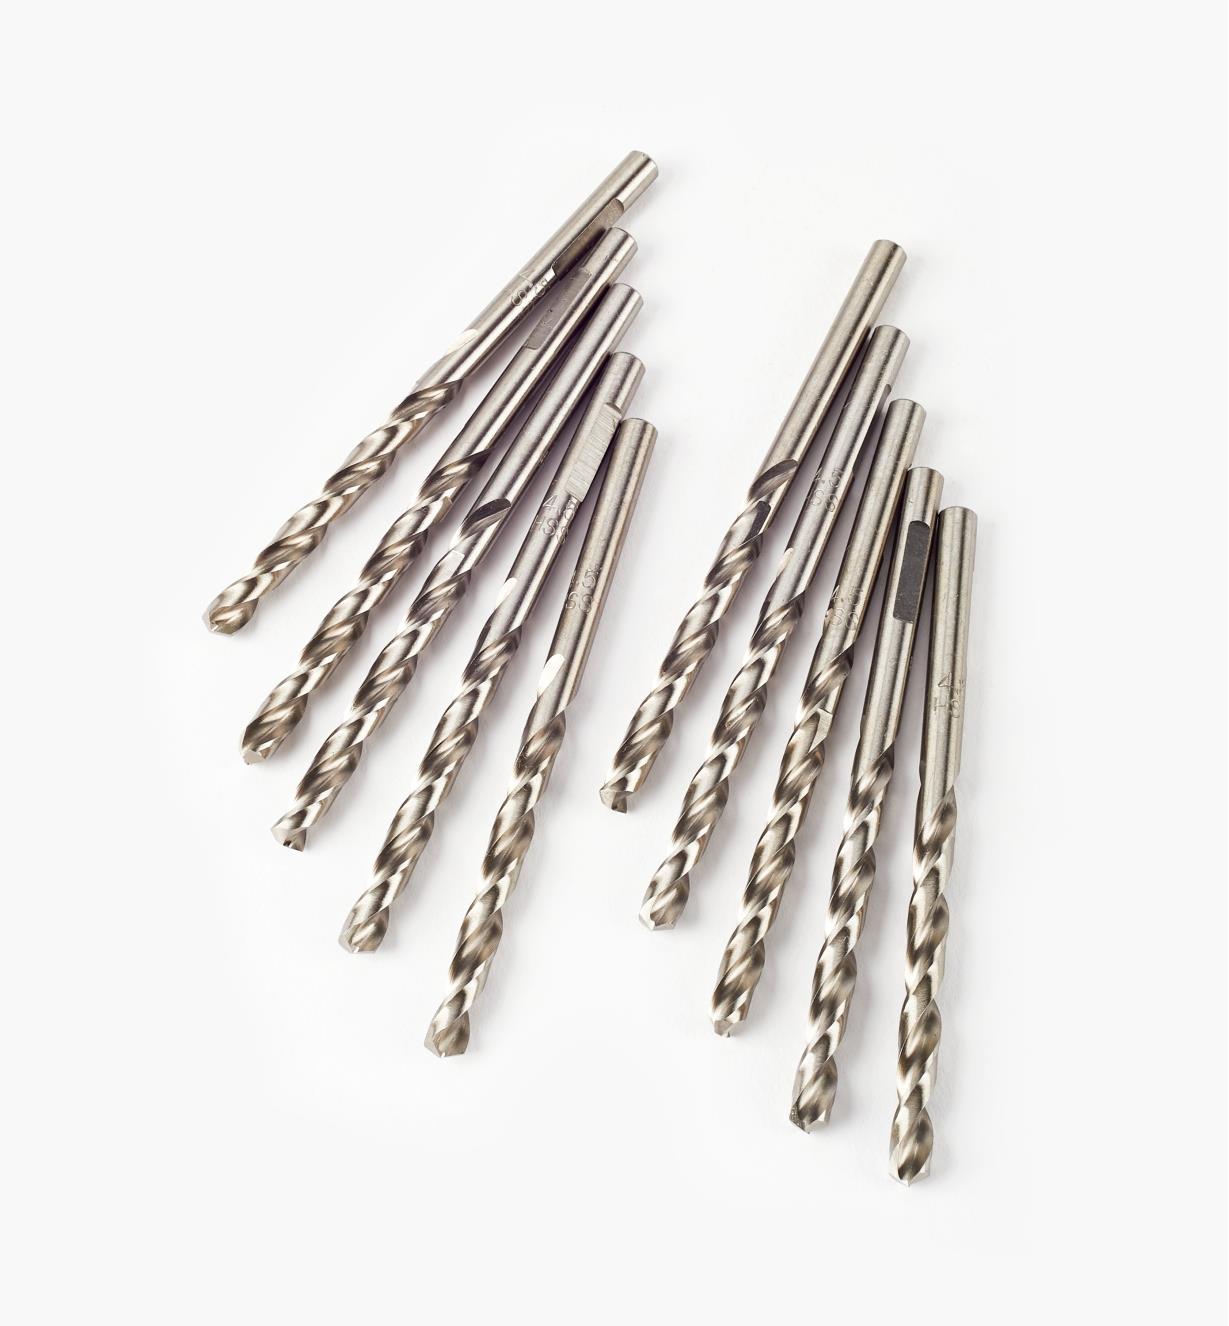 ZA493440 - Centrotec HSS Spiral Drill Bits (Replacement packs) - 4.5mm